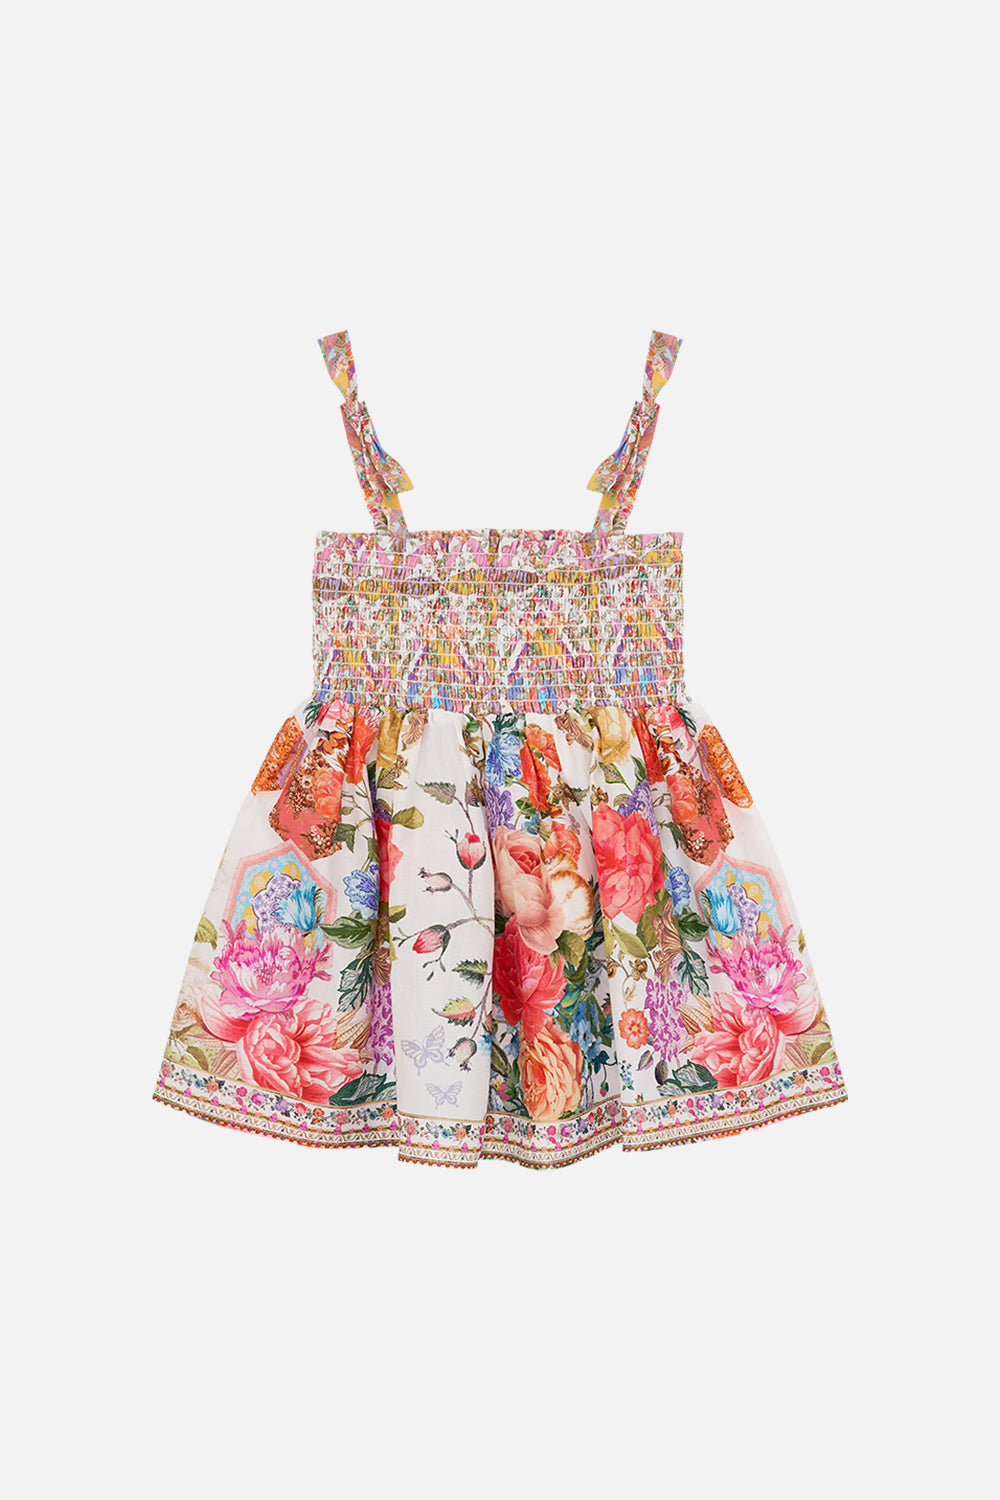 CAMILLA floral babies dress with shirring in Sew Yesterday